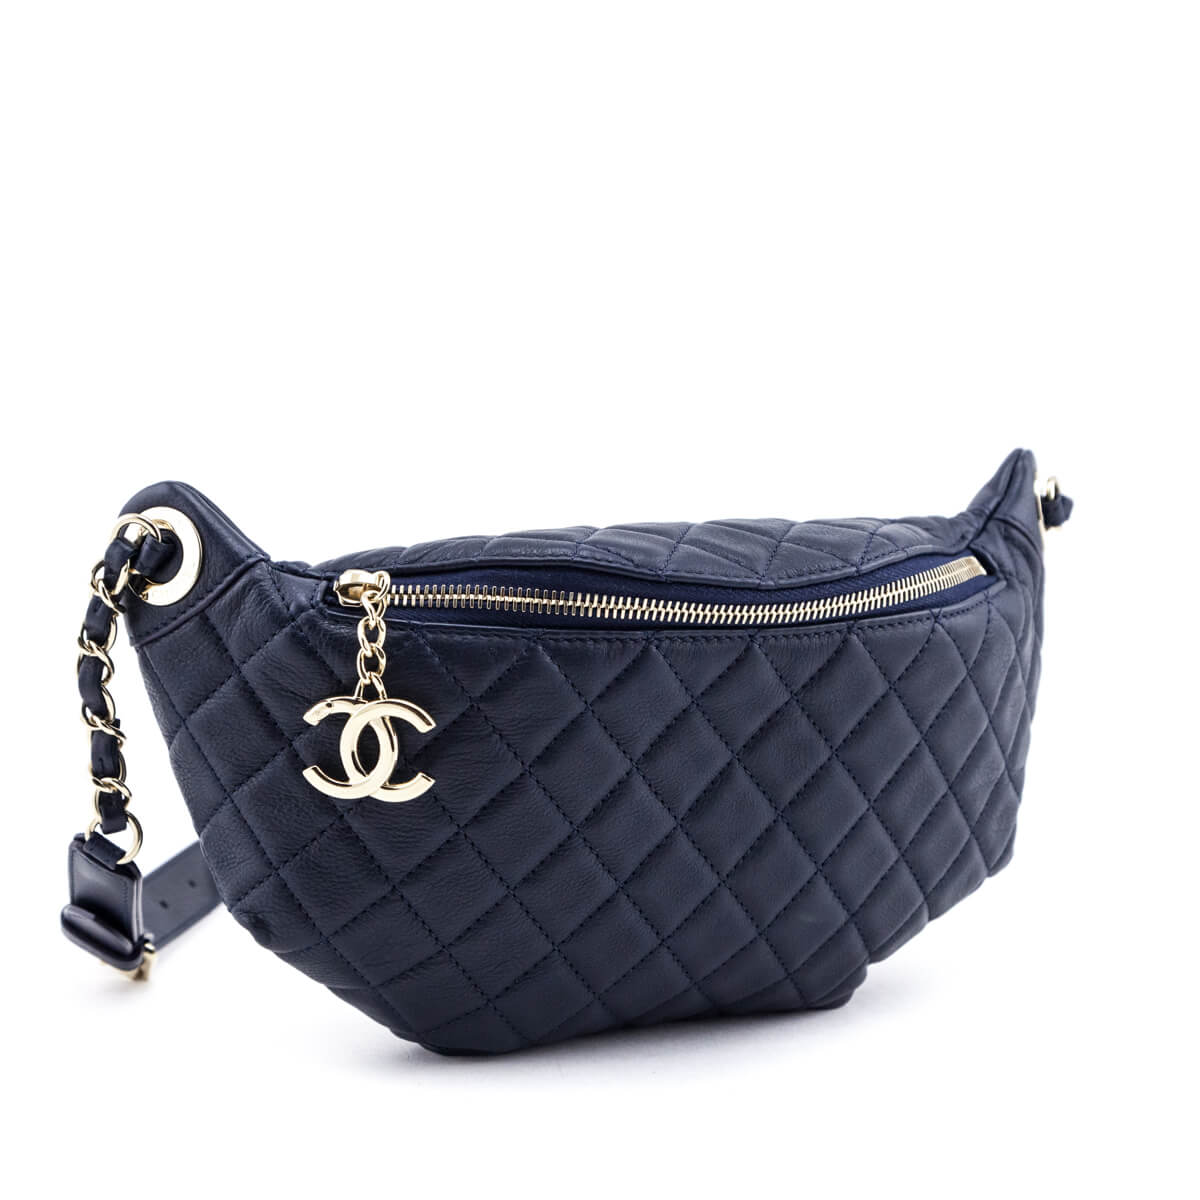 Chanel Navy Quilted Calfskin Banane Waist Bag - Shop Authentic Chanel